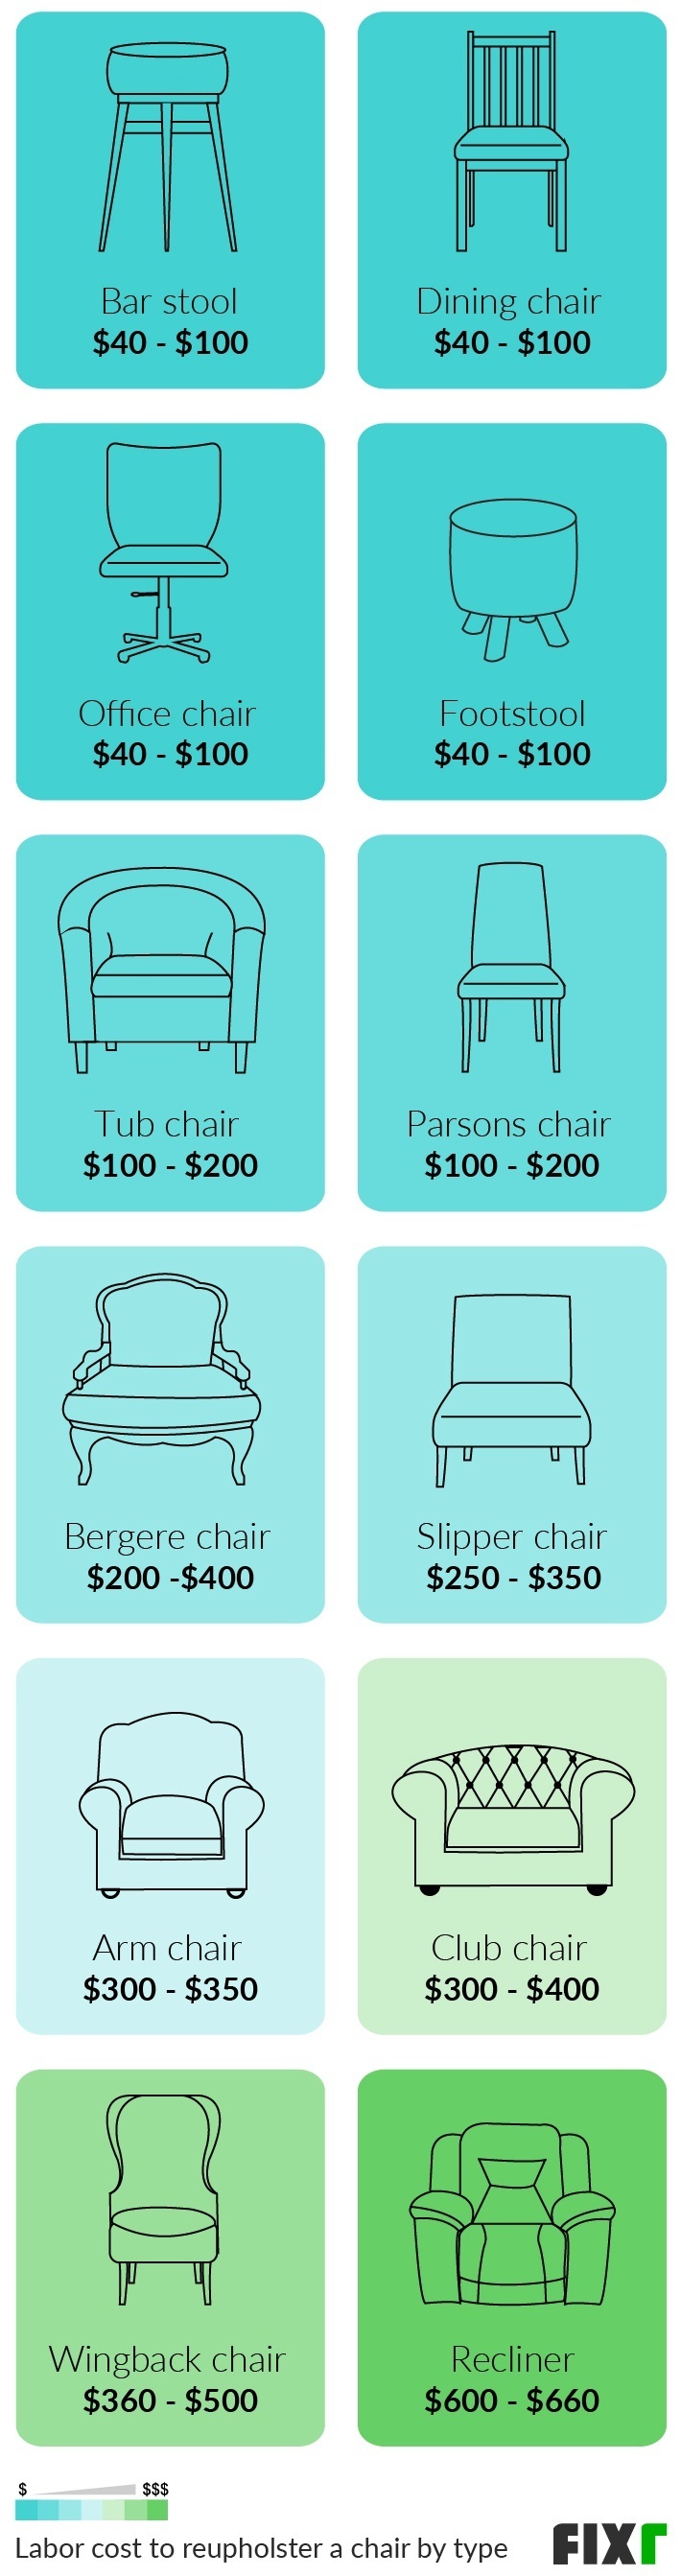 2021 Cost To Reupholster A Chair, Cost To Recover Wingback Chair Uk